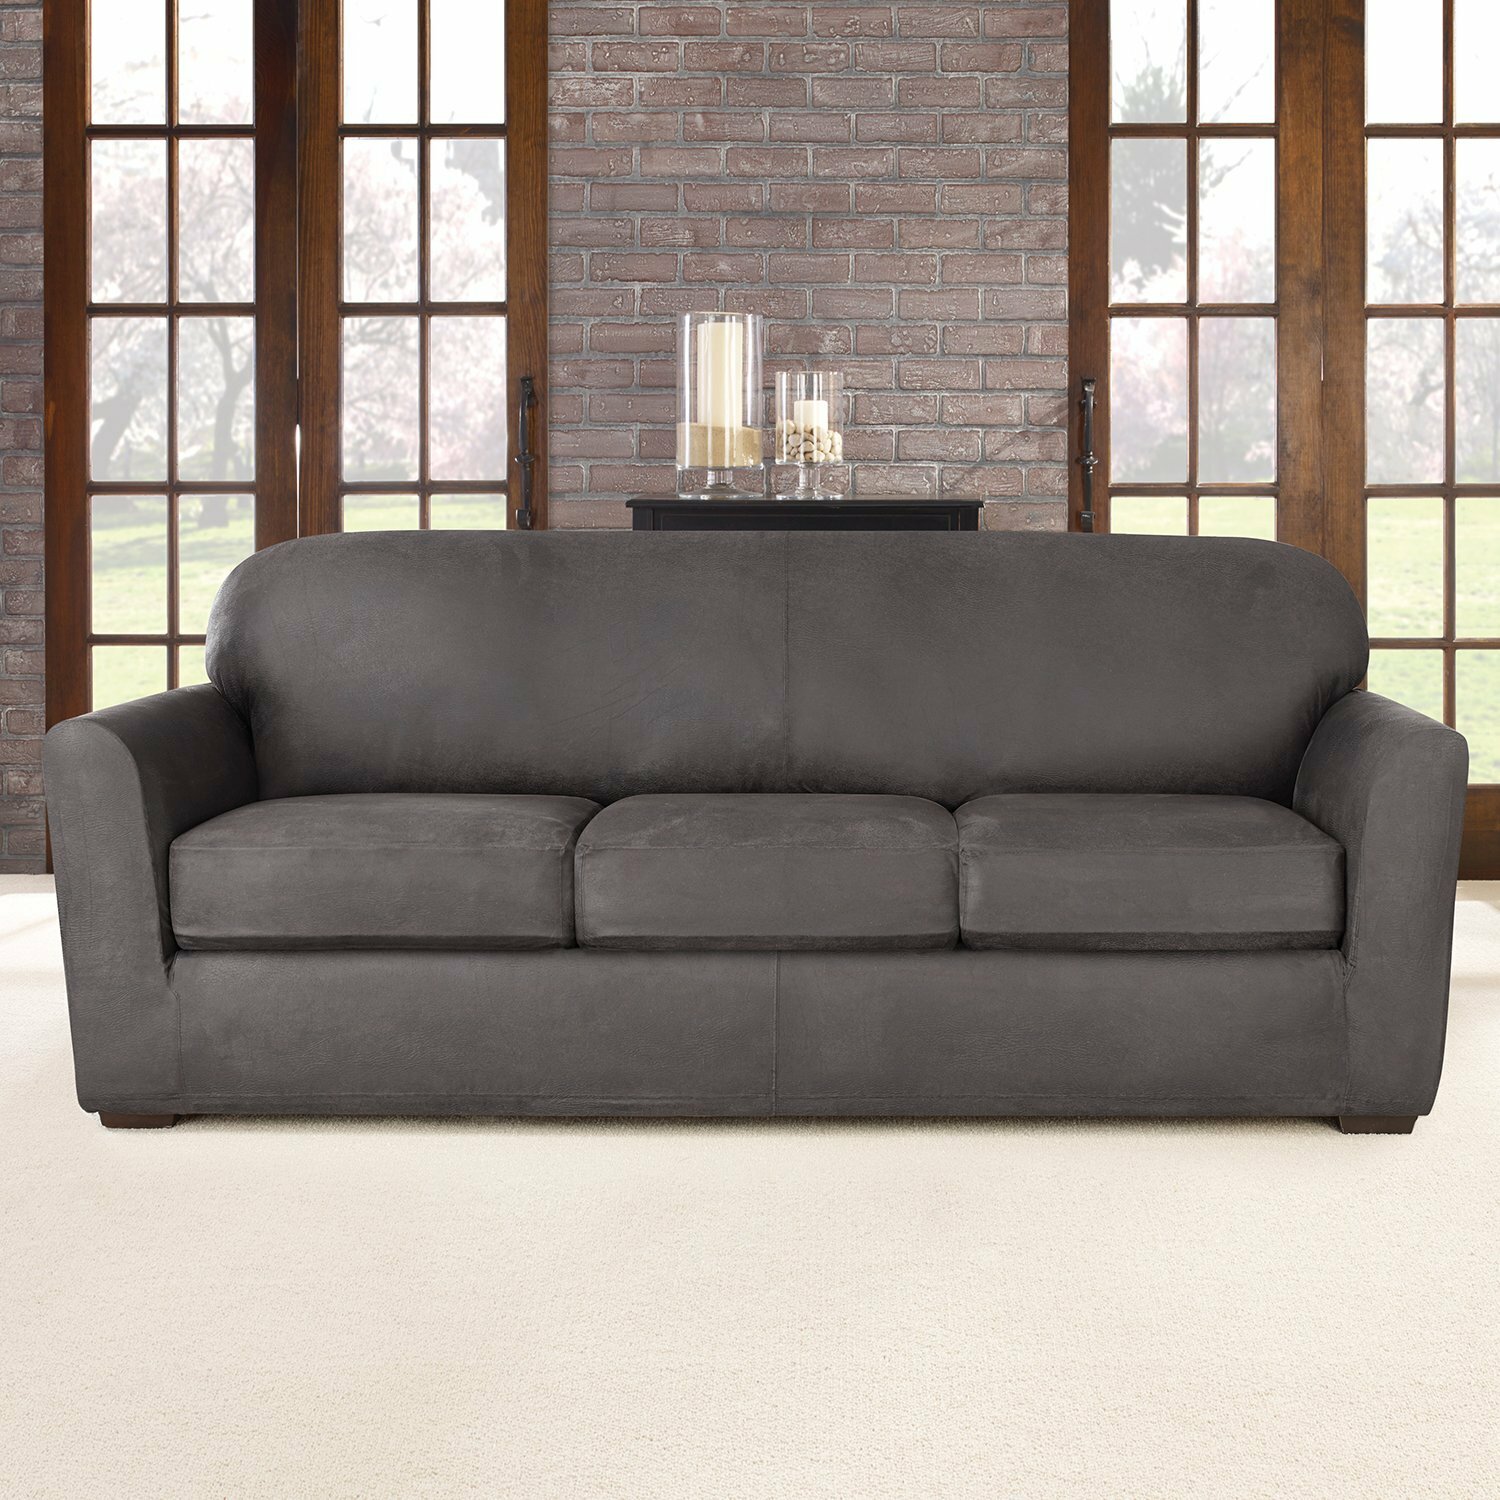 Ultimate Stretch Box Cushion Sofa Slipcover, Upholstery Material: Polyester Blend, Upholstery Material Details: Faux suede - image 1 of 6